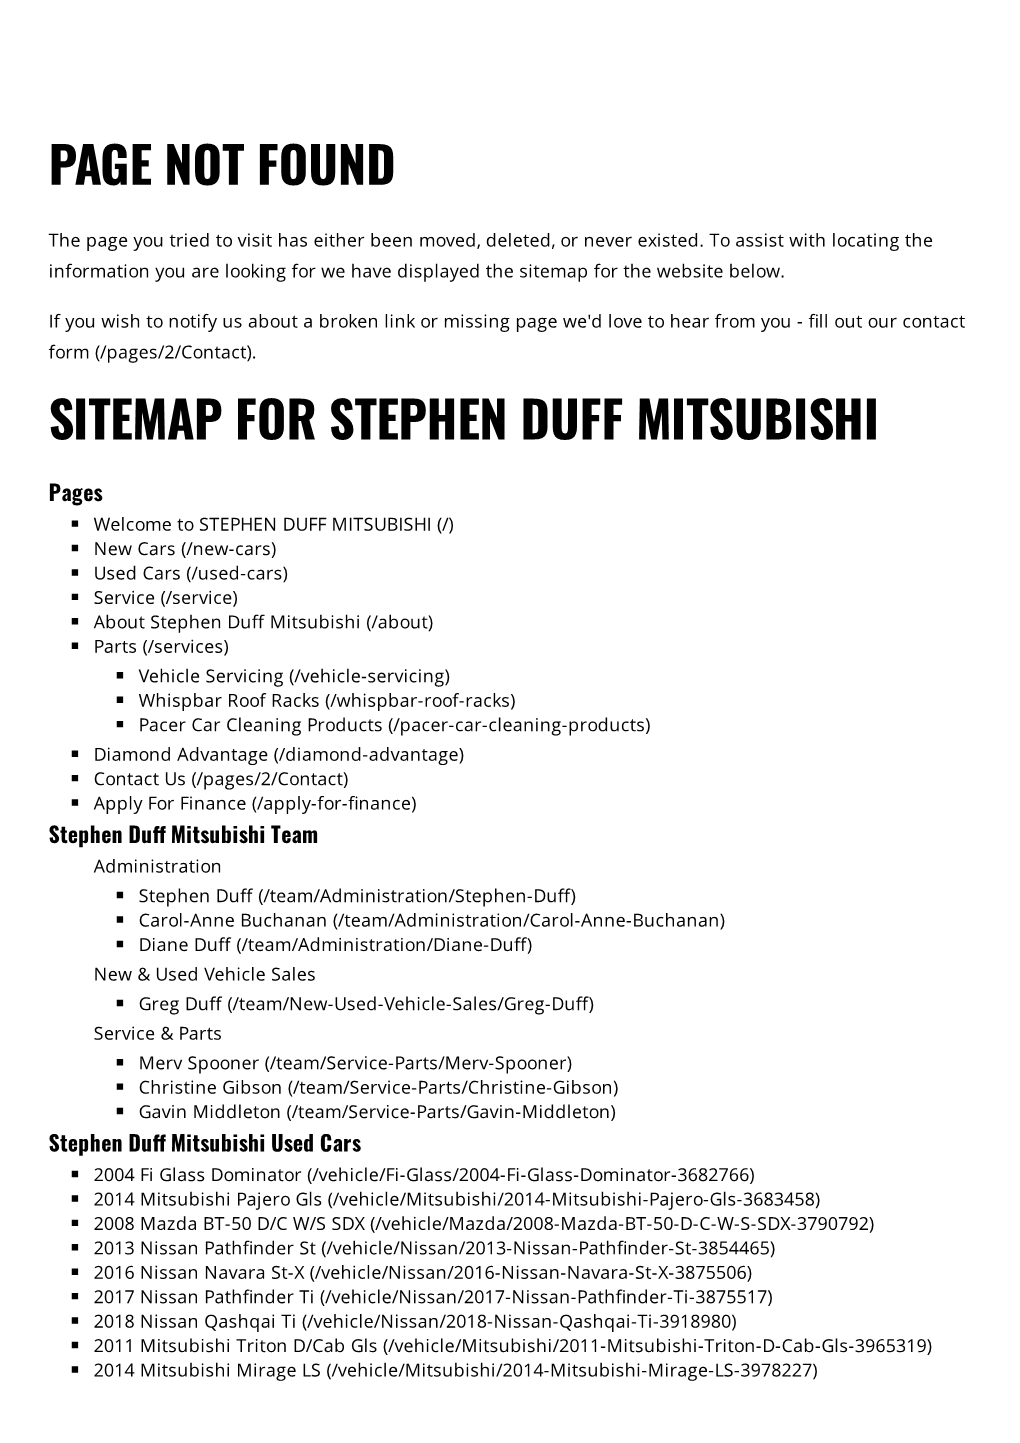 Page Not Found Sitemap for Stephen Duff Mitsubishi